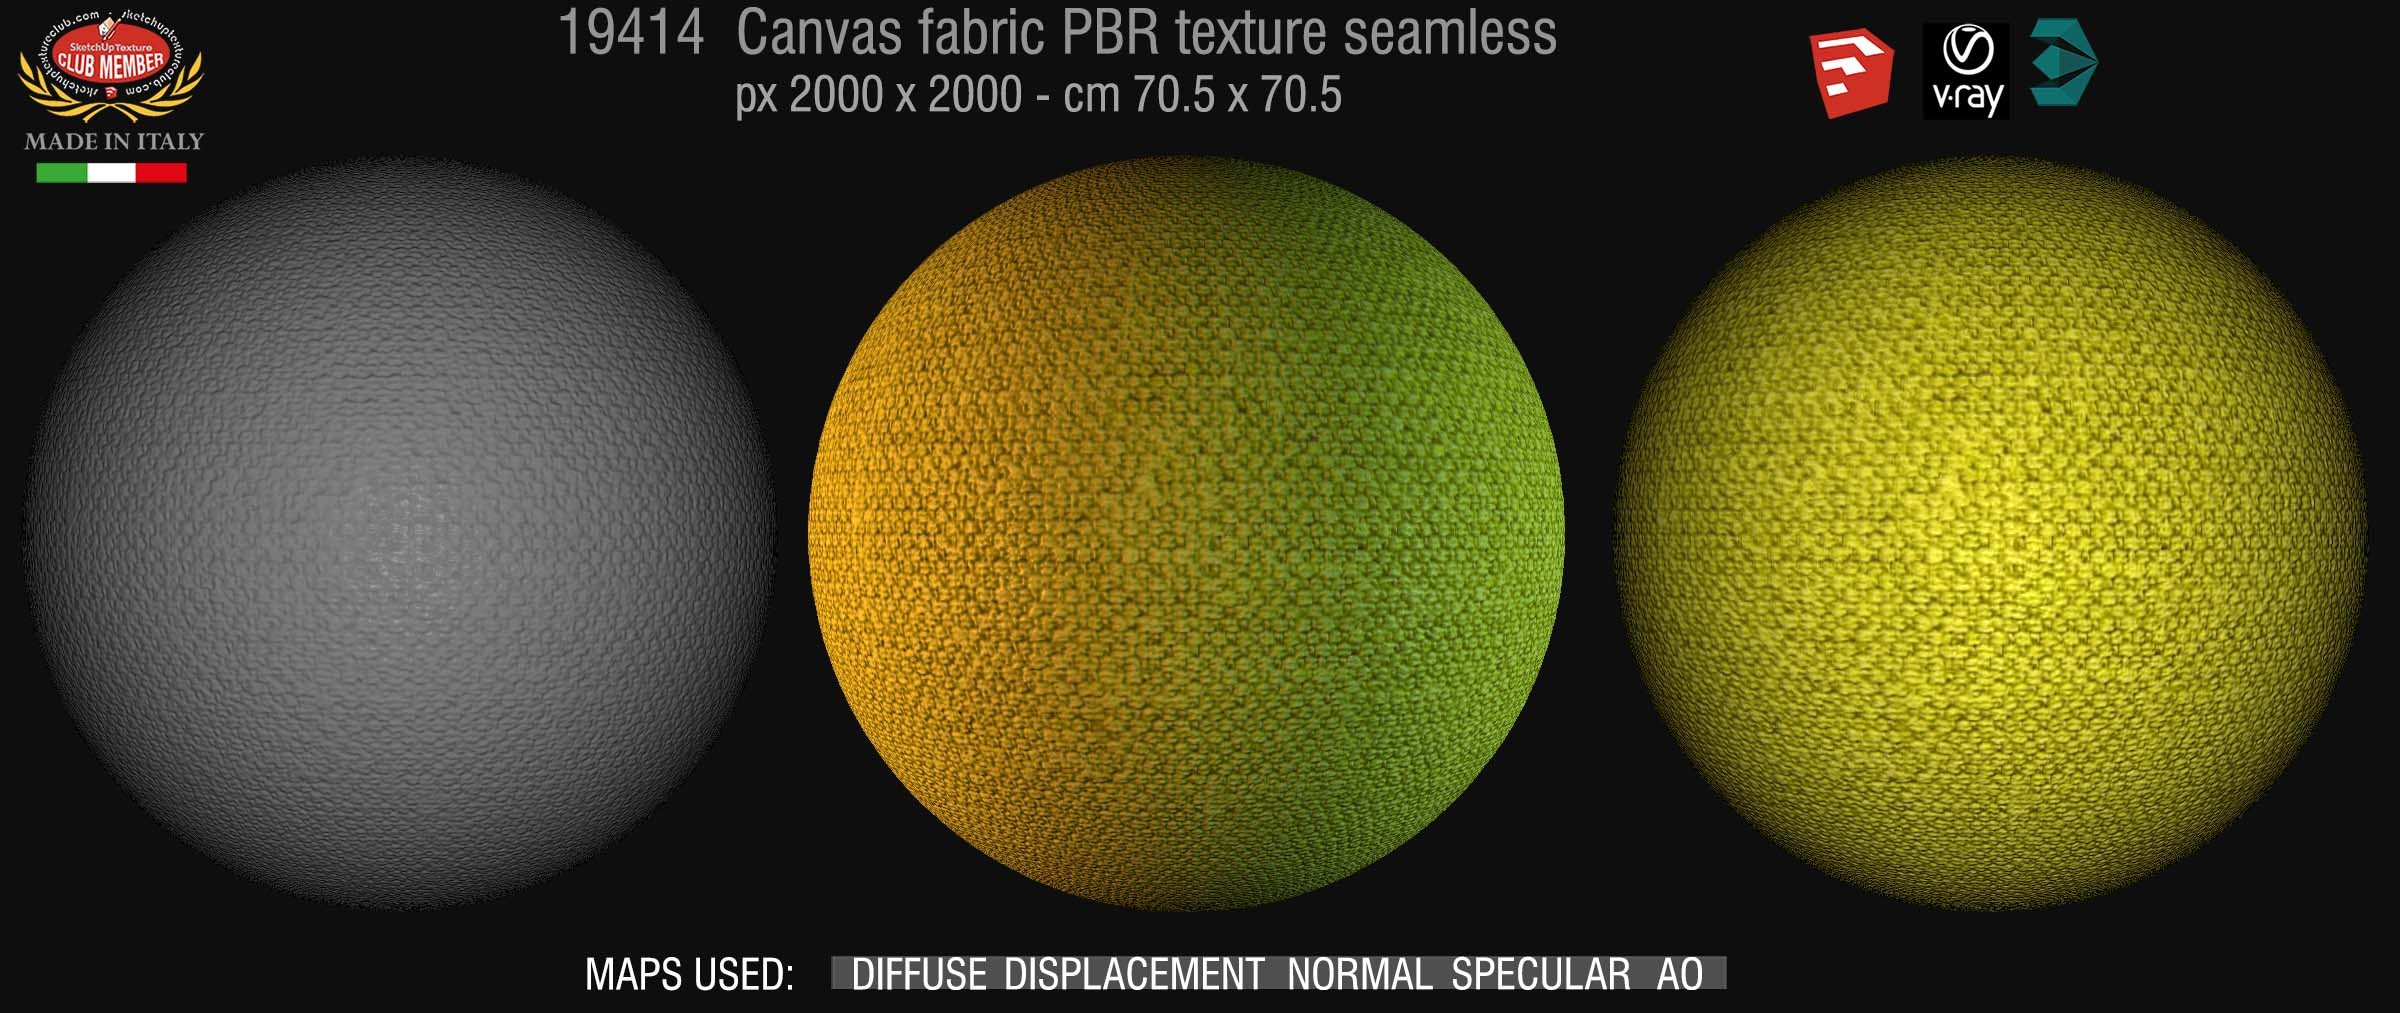 19414 Brushed canvas fabric PBR texture seamless DEMO